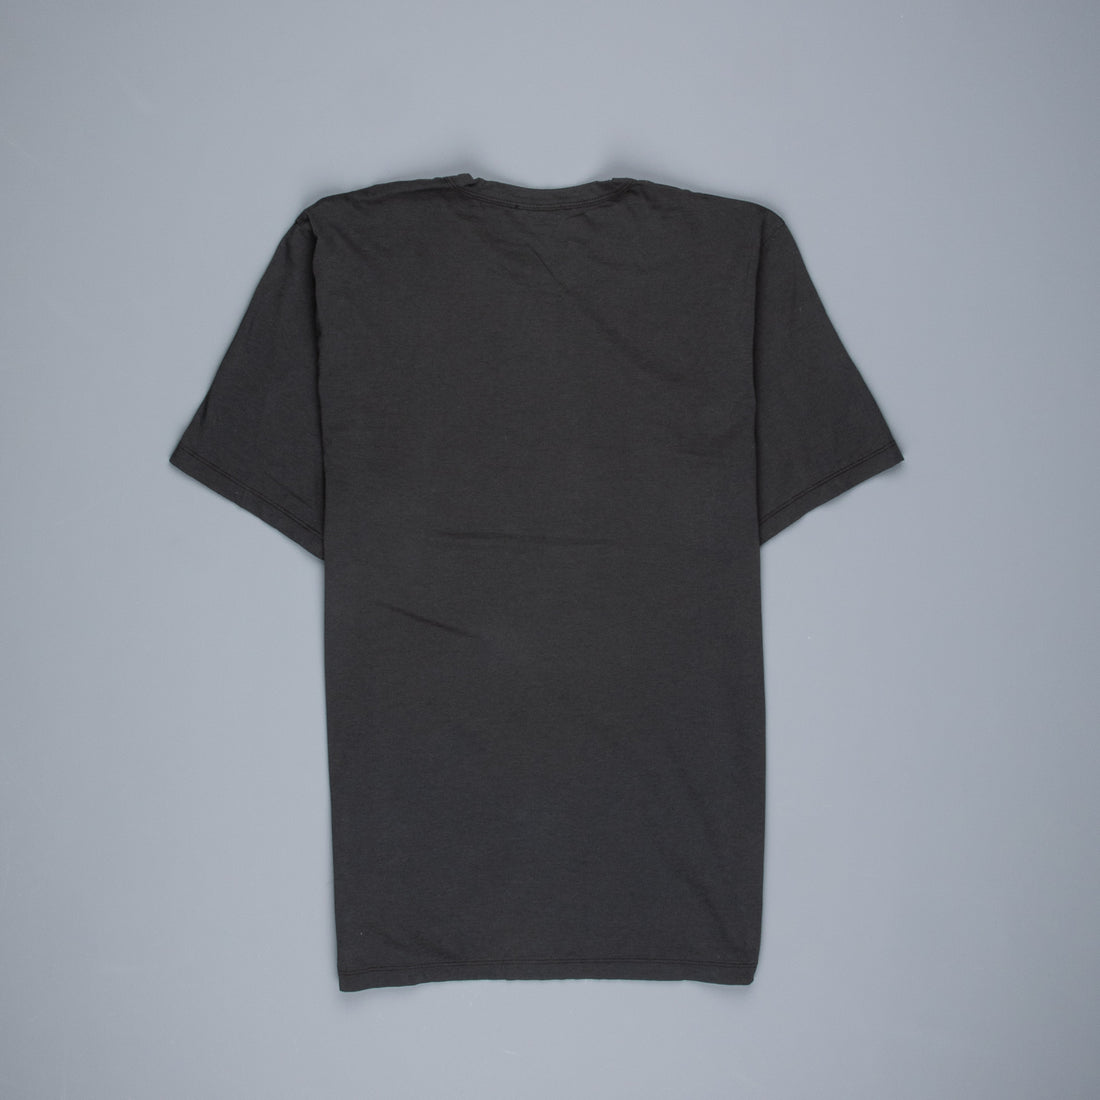 James Perse Elevated Lotus jersey short sleeve crew neck tee Carbon